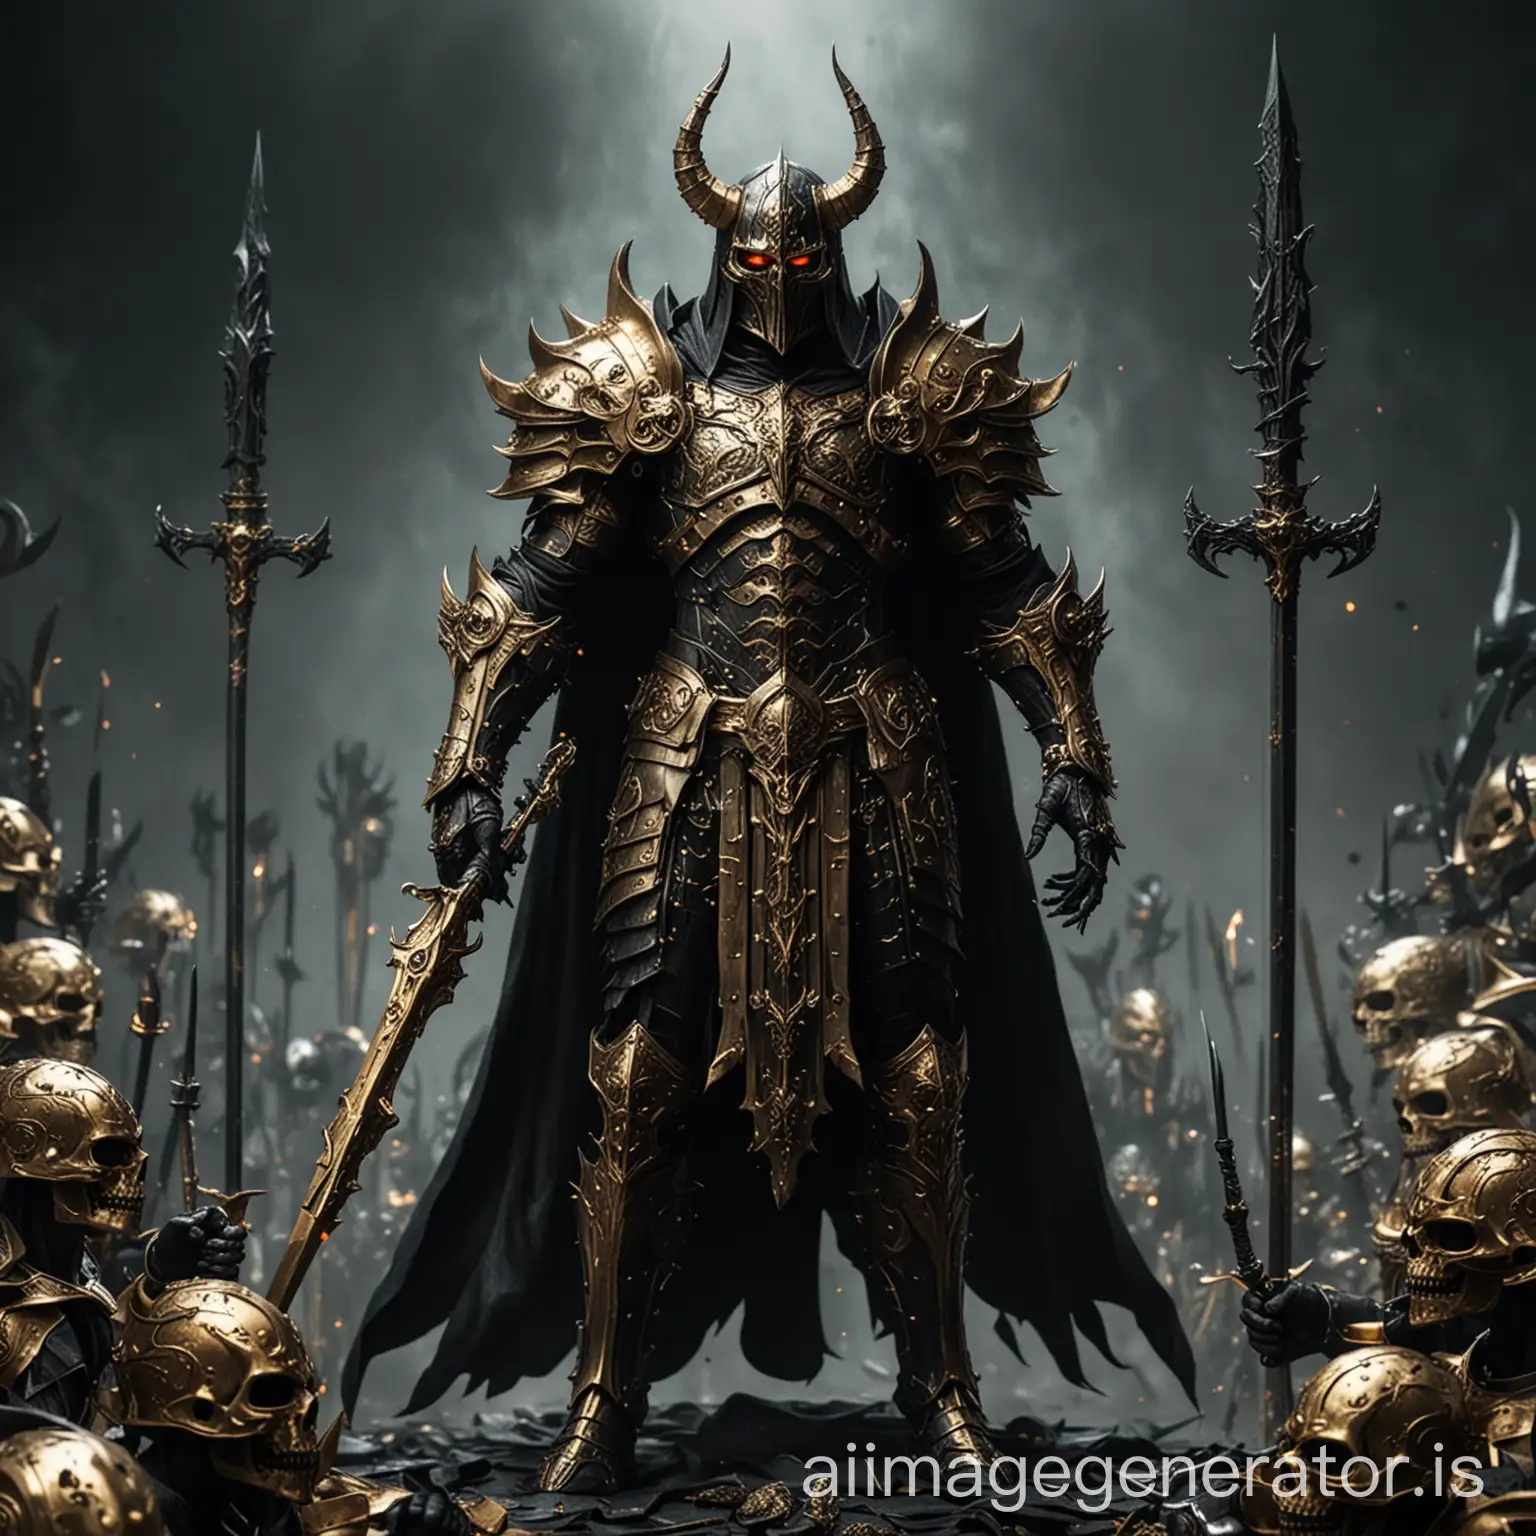 a dark lord with set of weapons and golden armor